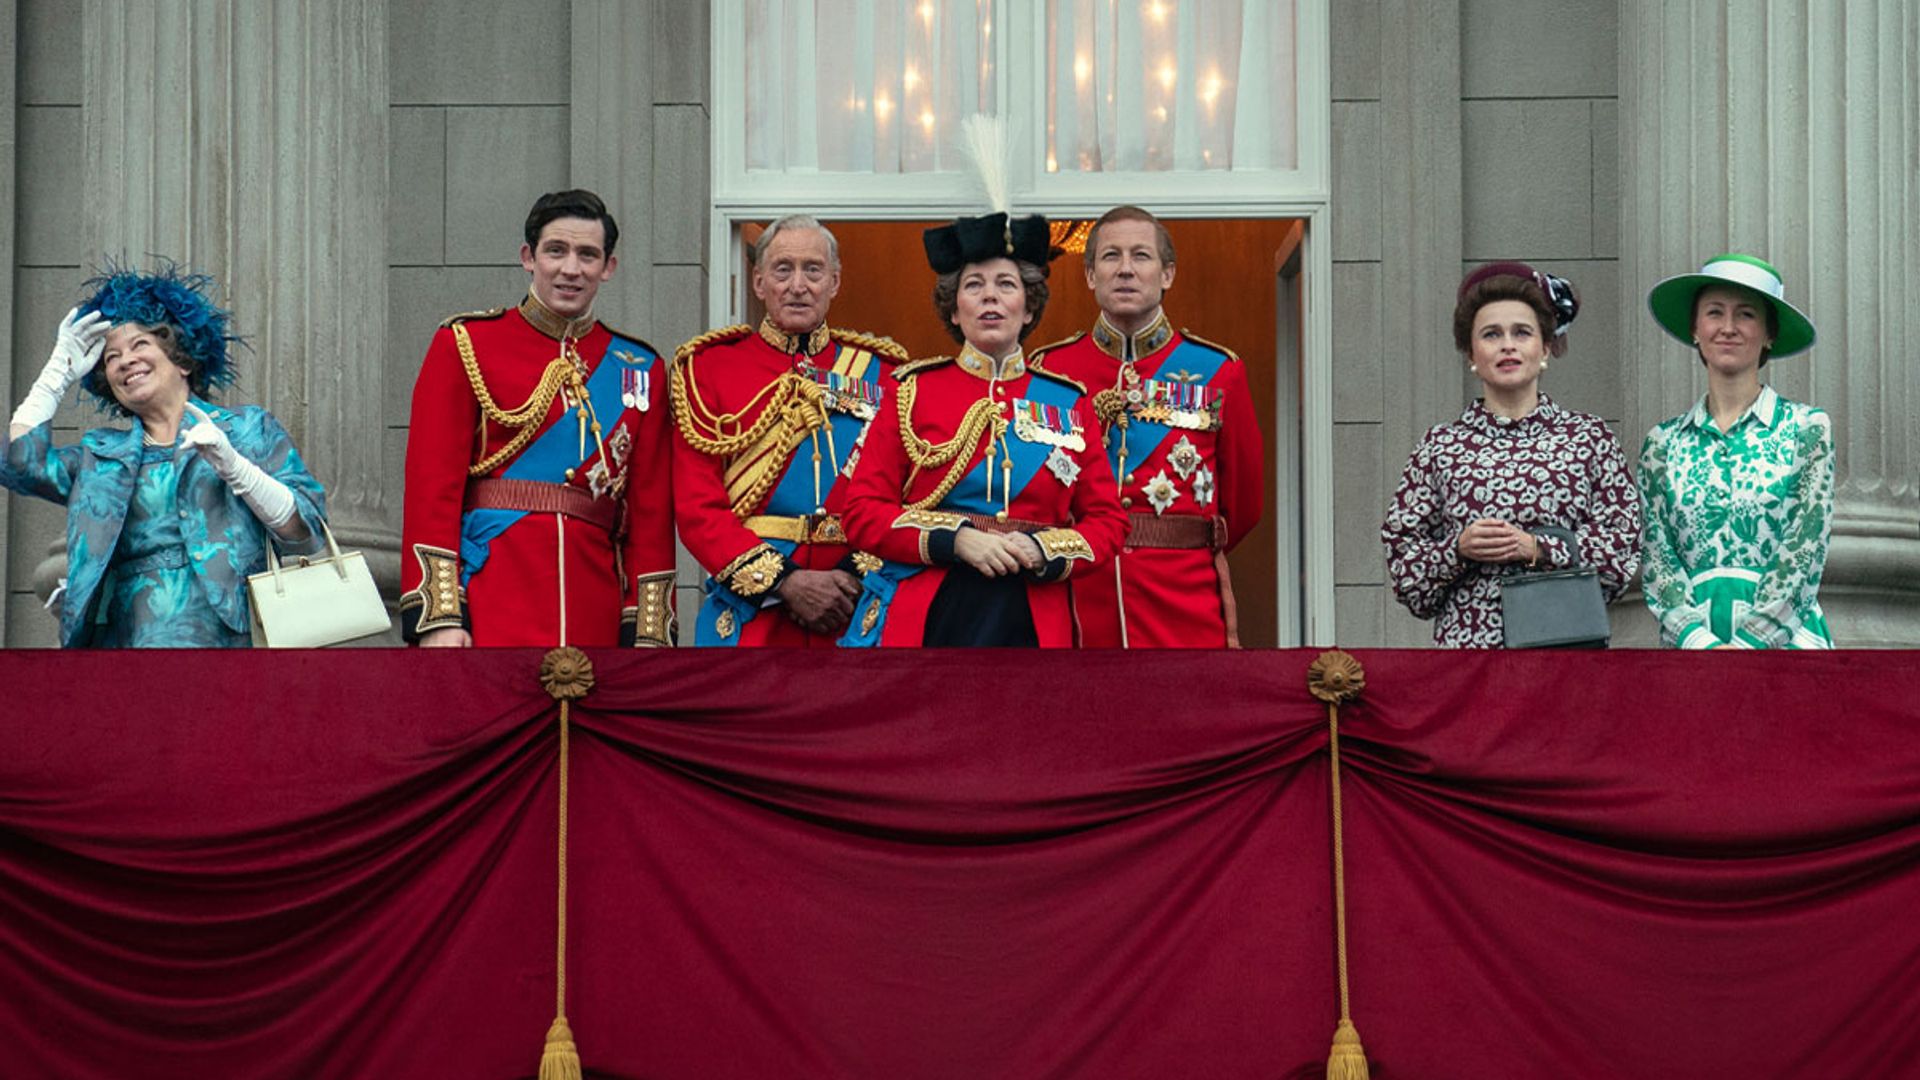 Filming for season five of The Crown kicks off amid ongoing casting difficulties - report